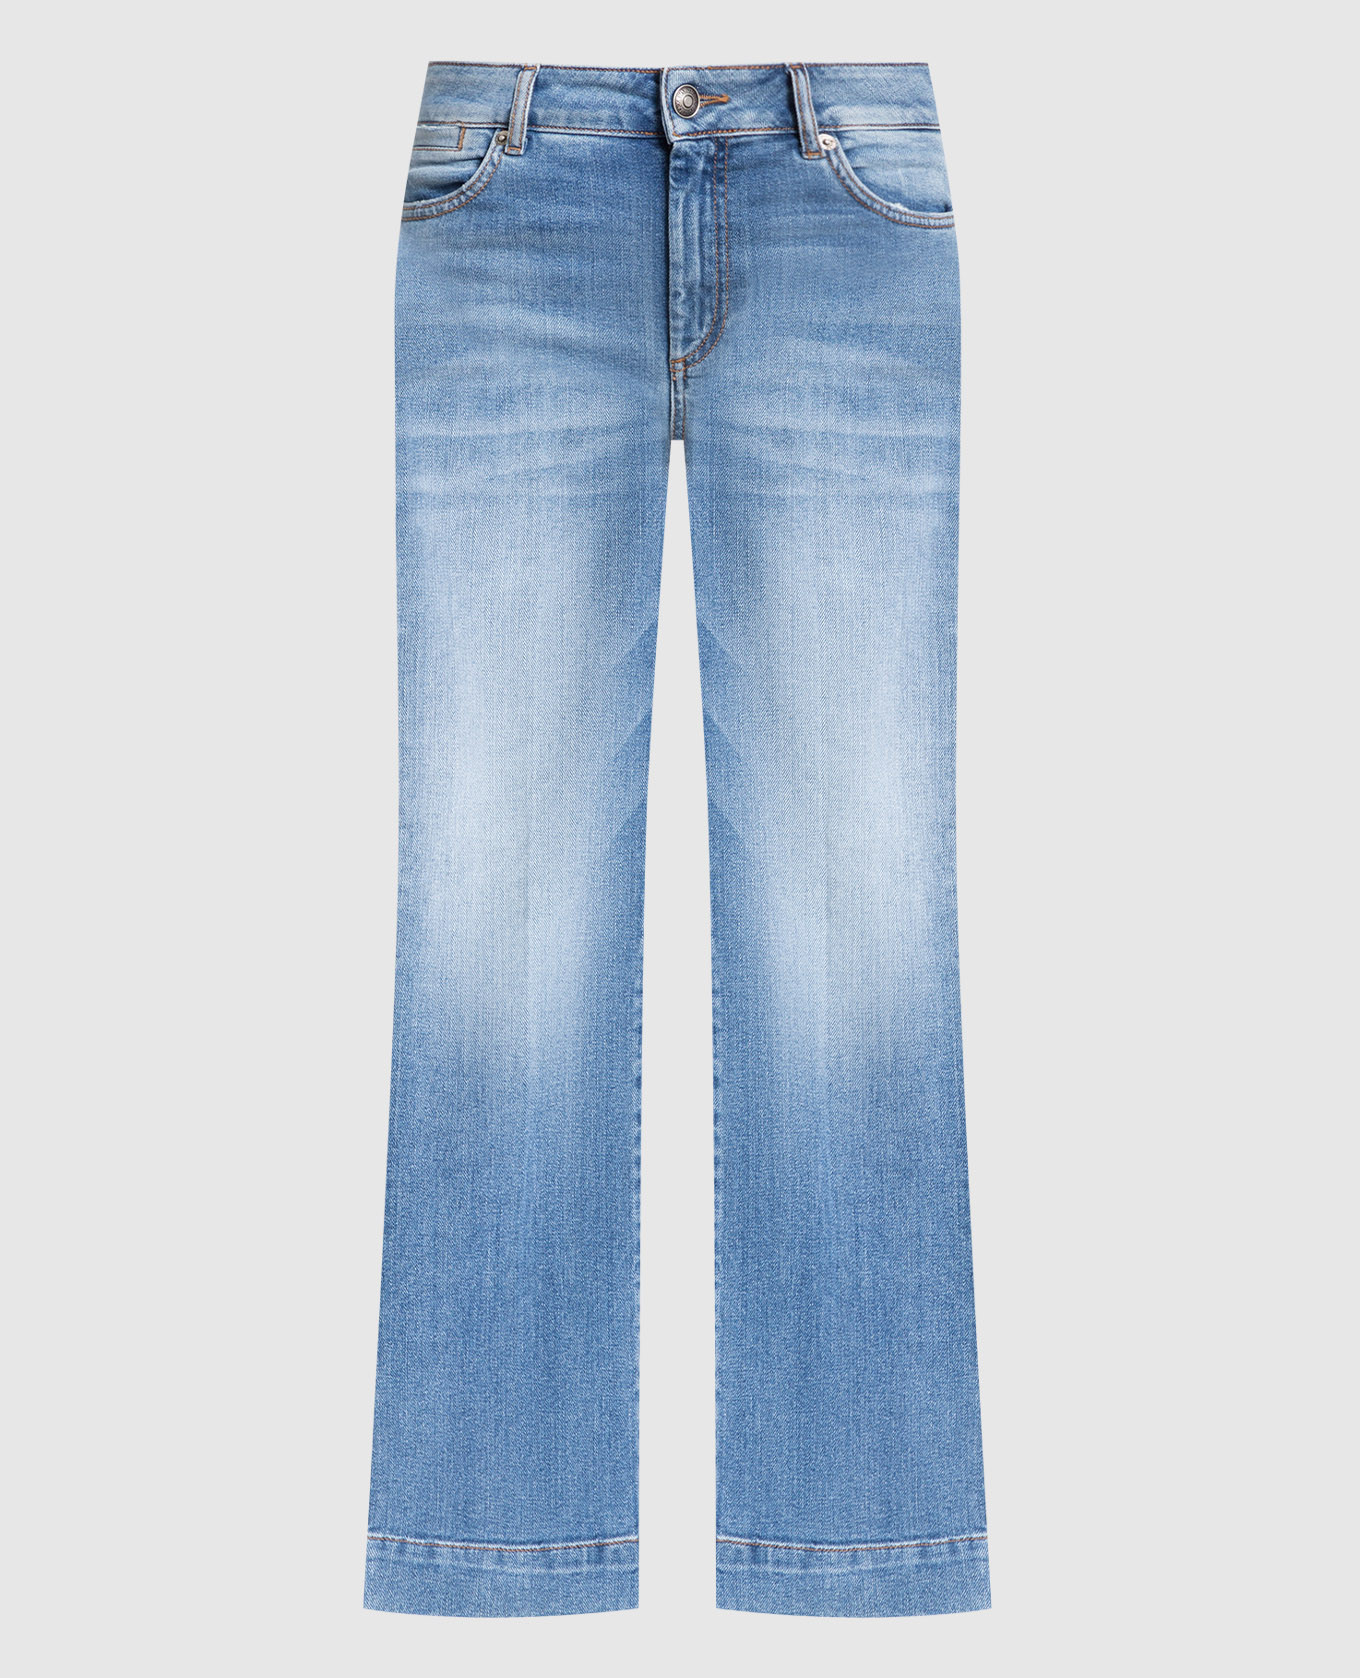 MESSICO blue jeans with a distressed effect